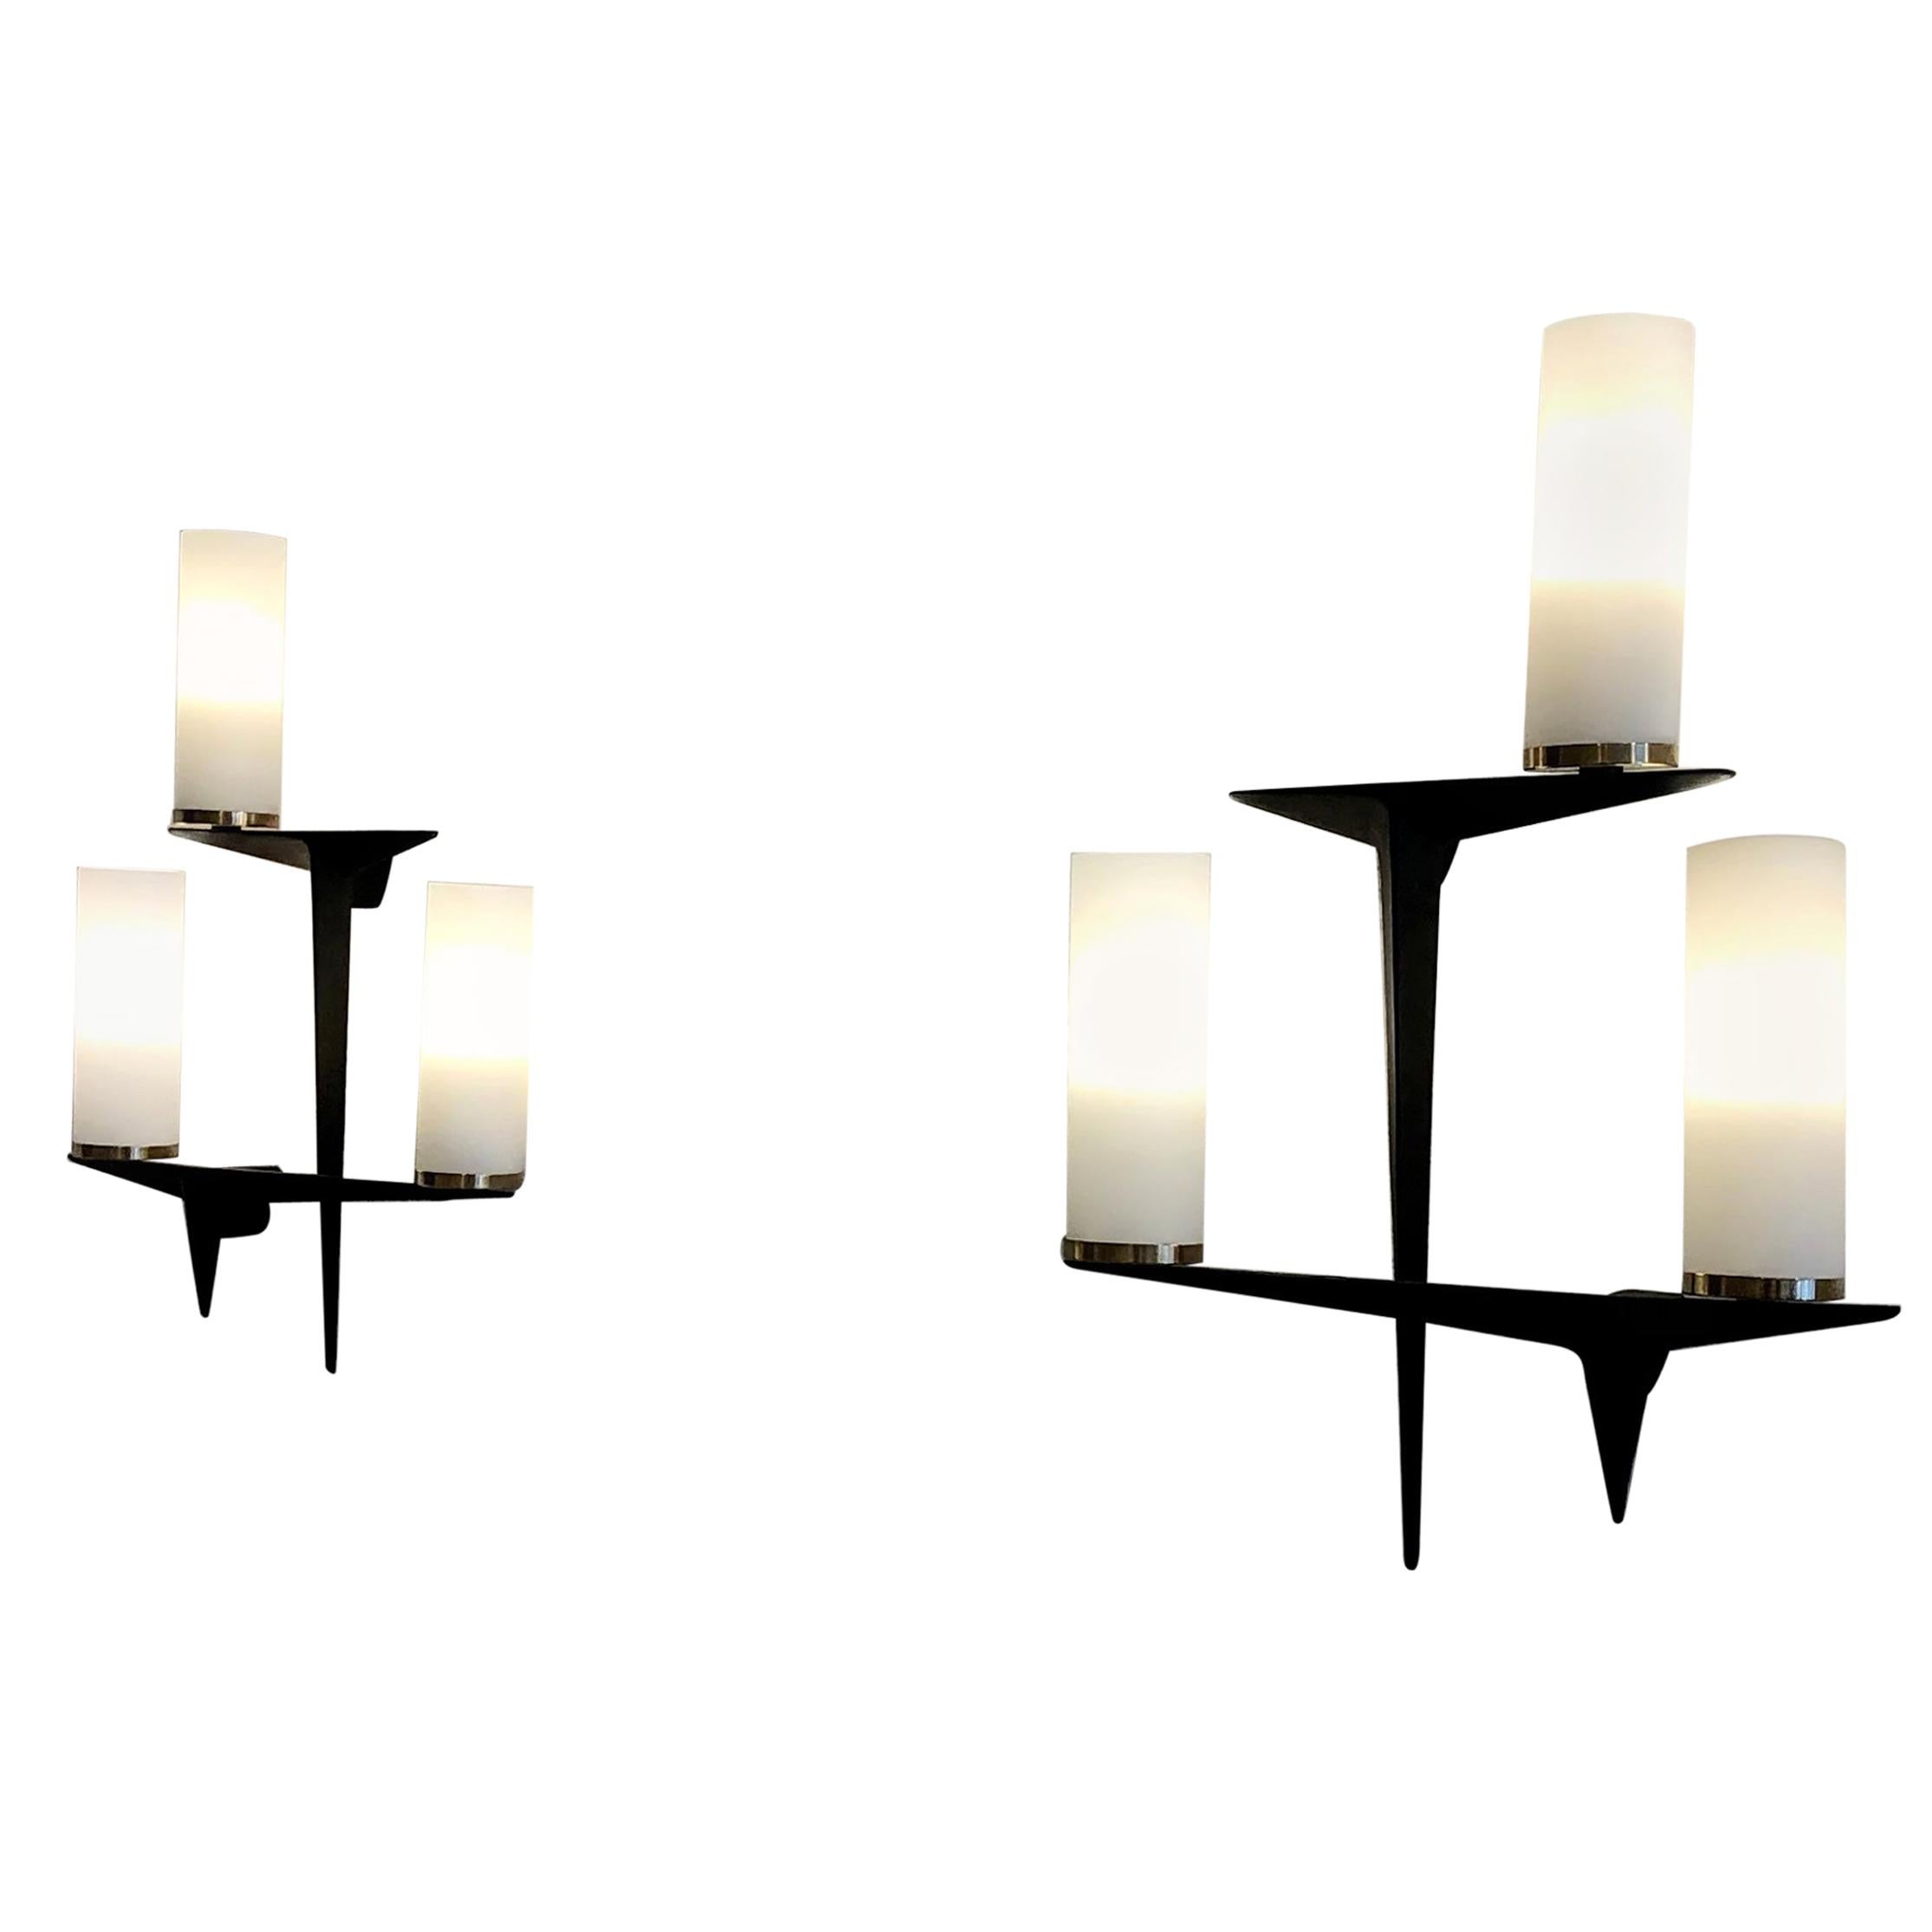 Pair of Sconces by Maison Arlus, 1950 For Sale